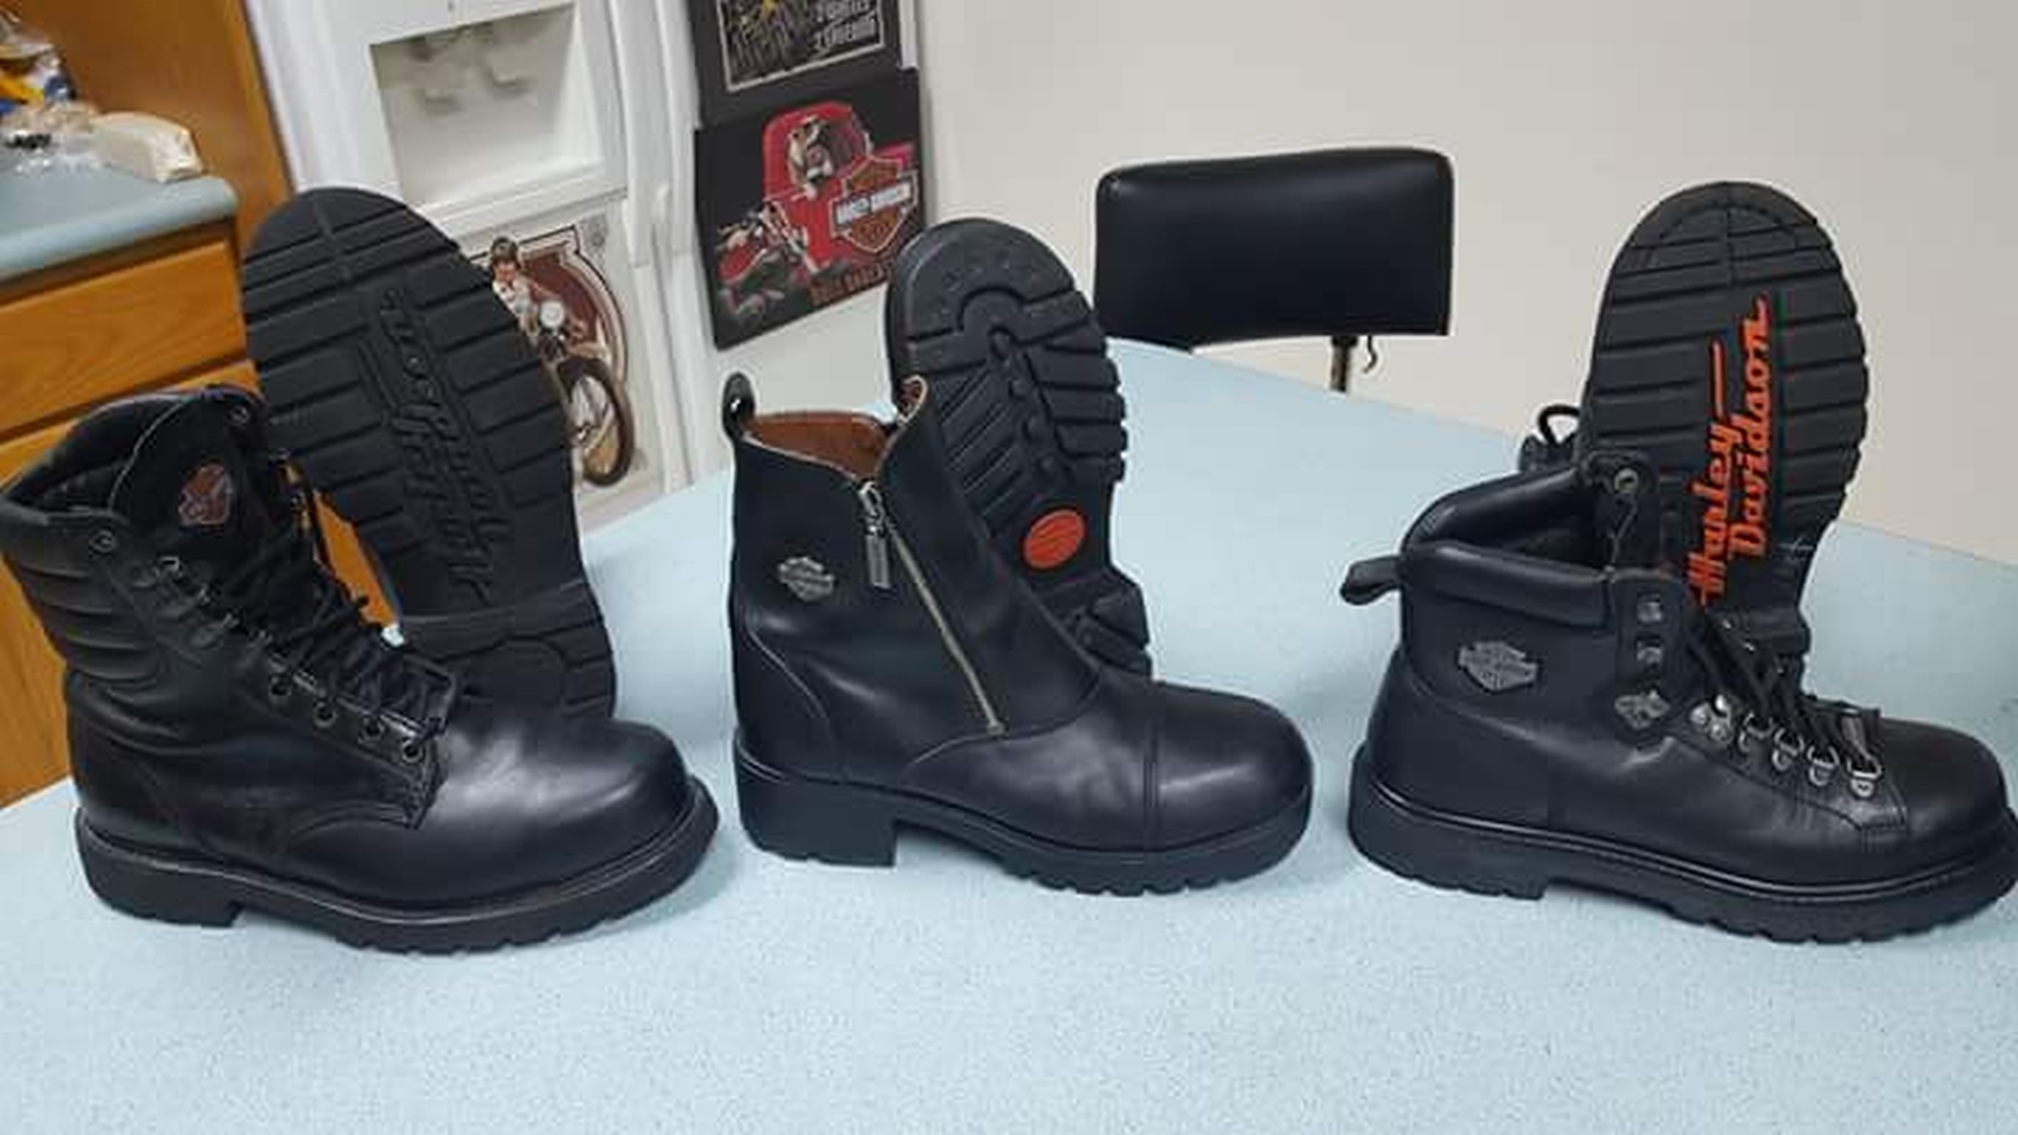 Three pairs of black leather boots pictures on a blue field. Of each pair the right boot is sitting normally while the left is propped against it's twin to show the tread. Two pairs on the ends are traditional lace-up engineer boots, the middle zip-up street boots. Emblazoned on the underside of one pair in red is the brand name.